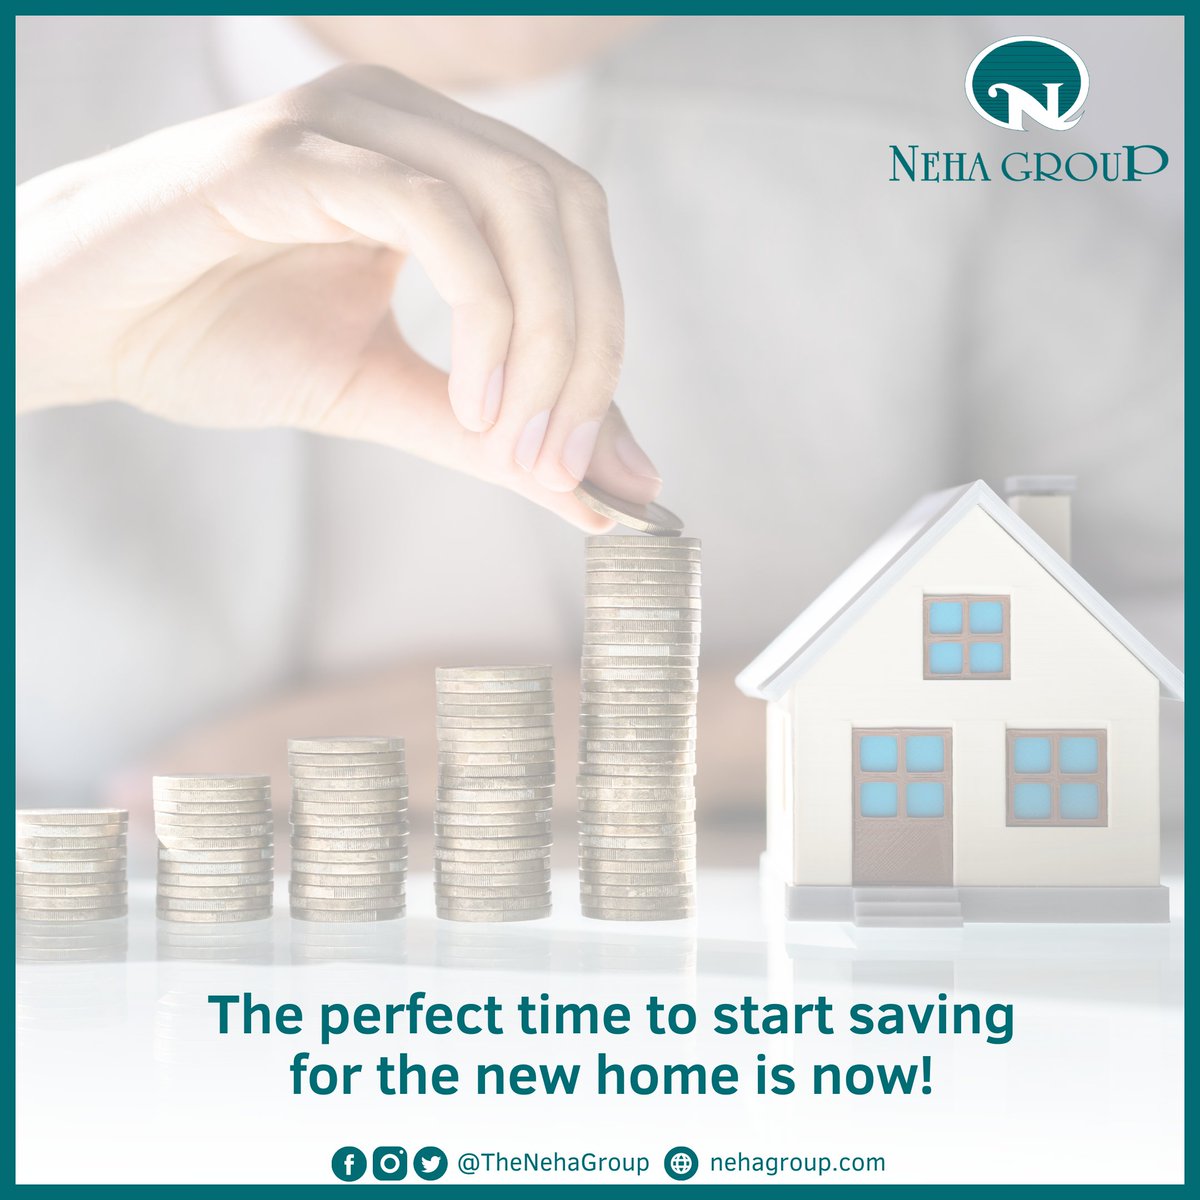 Time is precious, and so is your dream home. Start saving today to make it a reality tomorrow!
.
.
.
.
#MajesticMumbai #NehaGroup #DiscoverMumbai #Mumbai #MumbaiRealEstate #RealEstate #RealEstateMarket #Investment #Builder